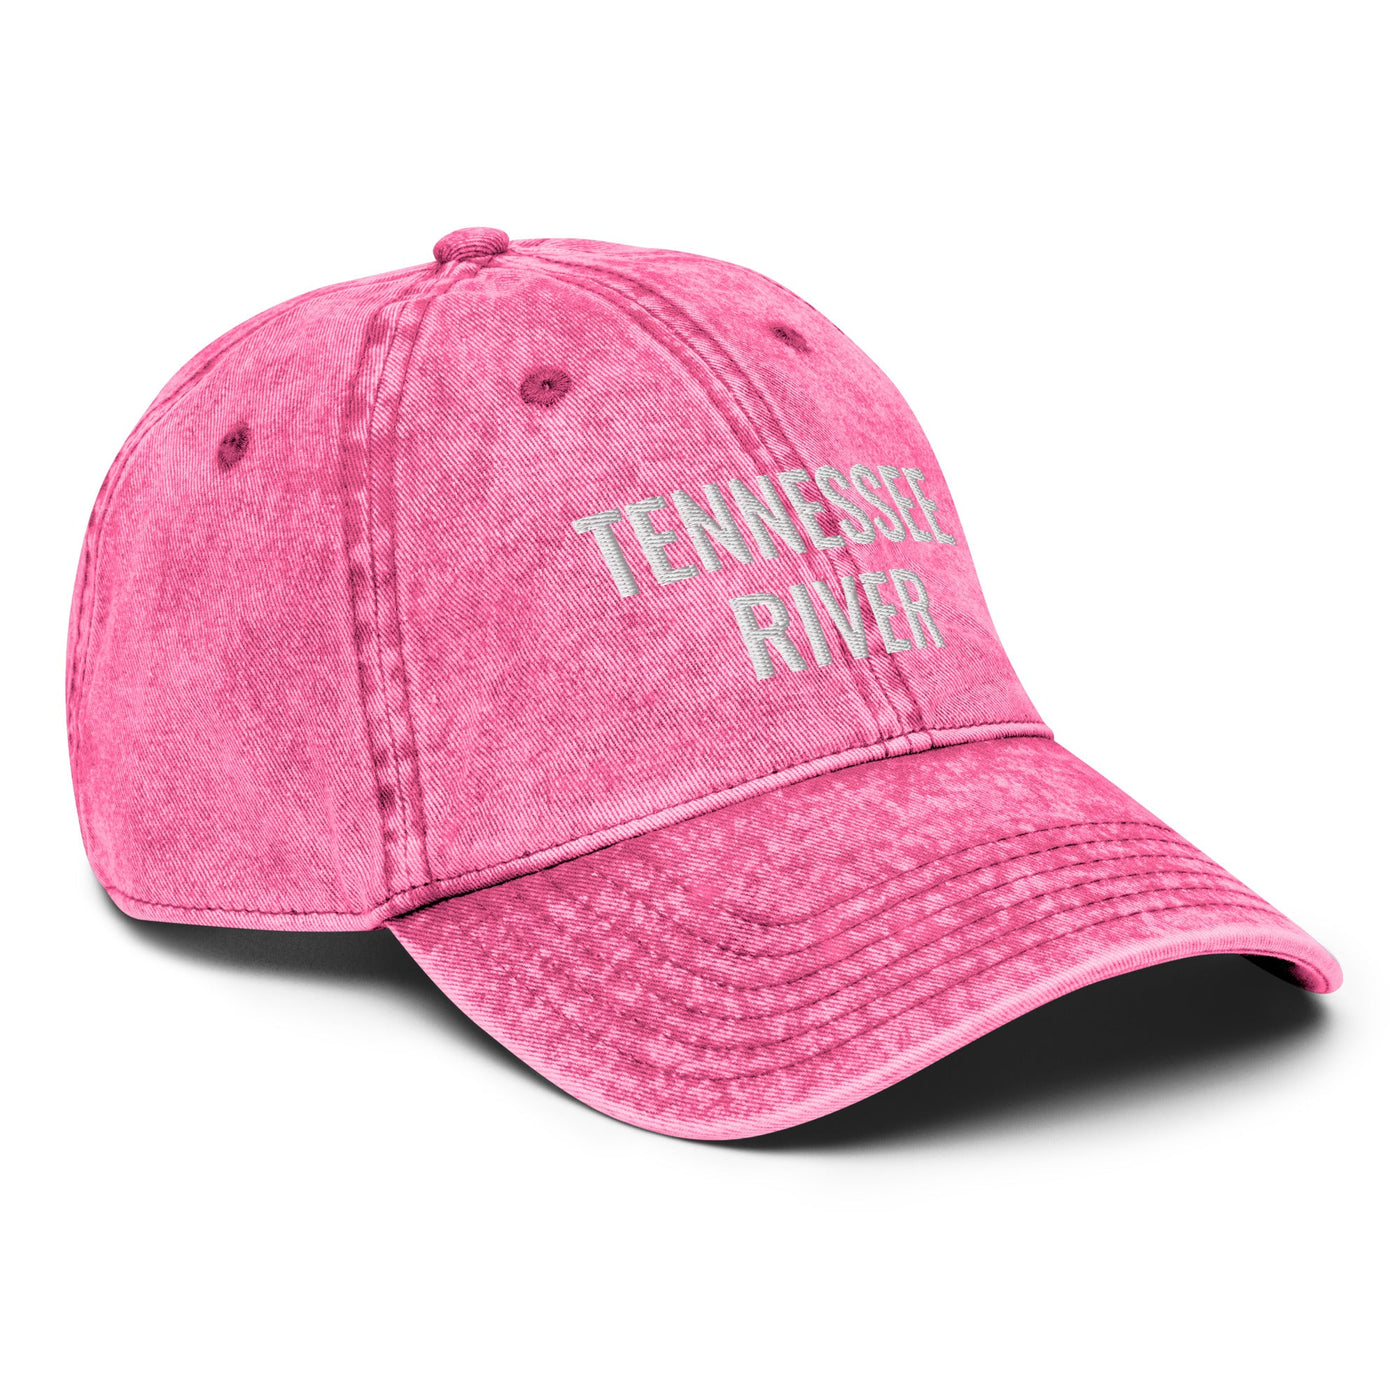 Tennessee River Hat - Ezra's Clothing